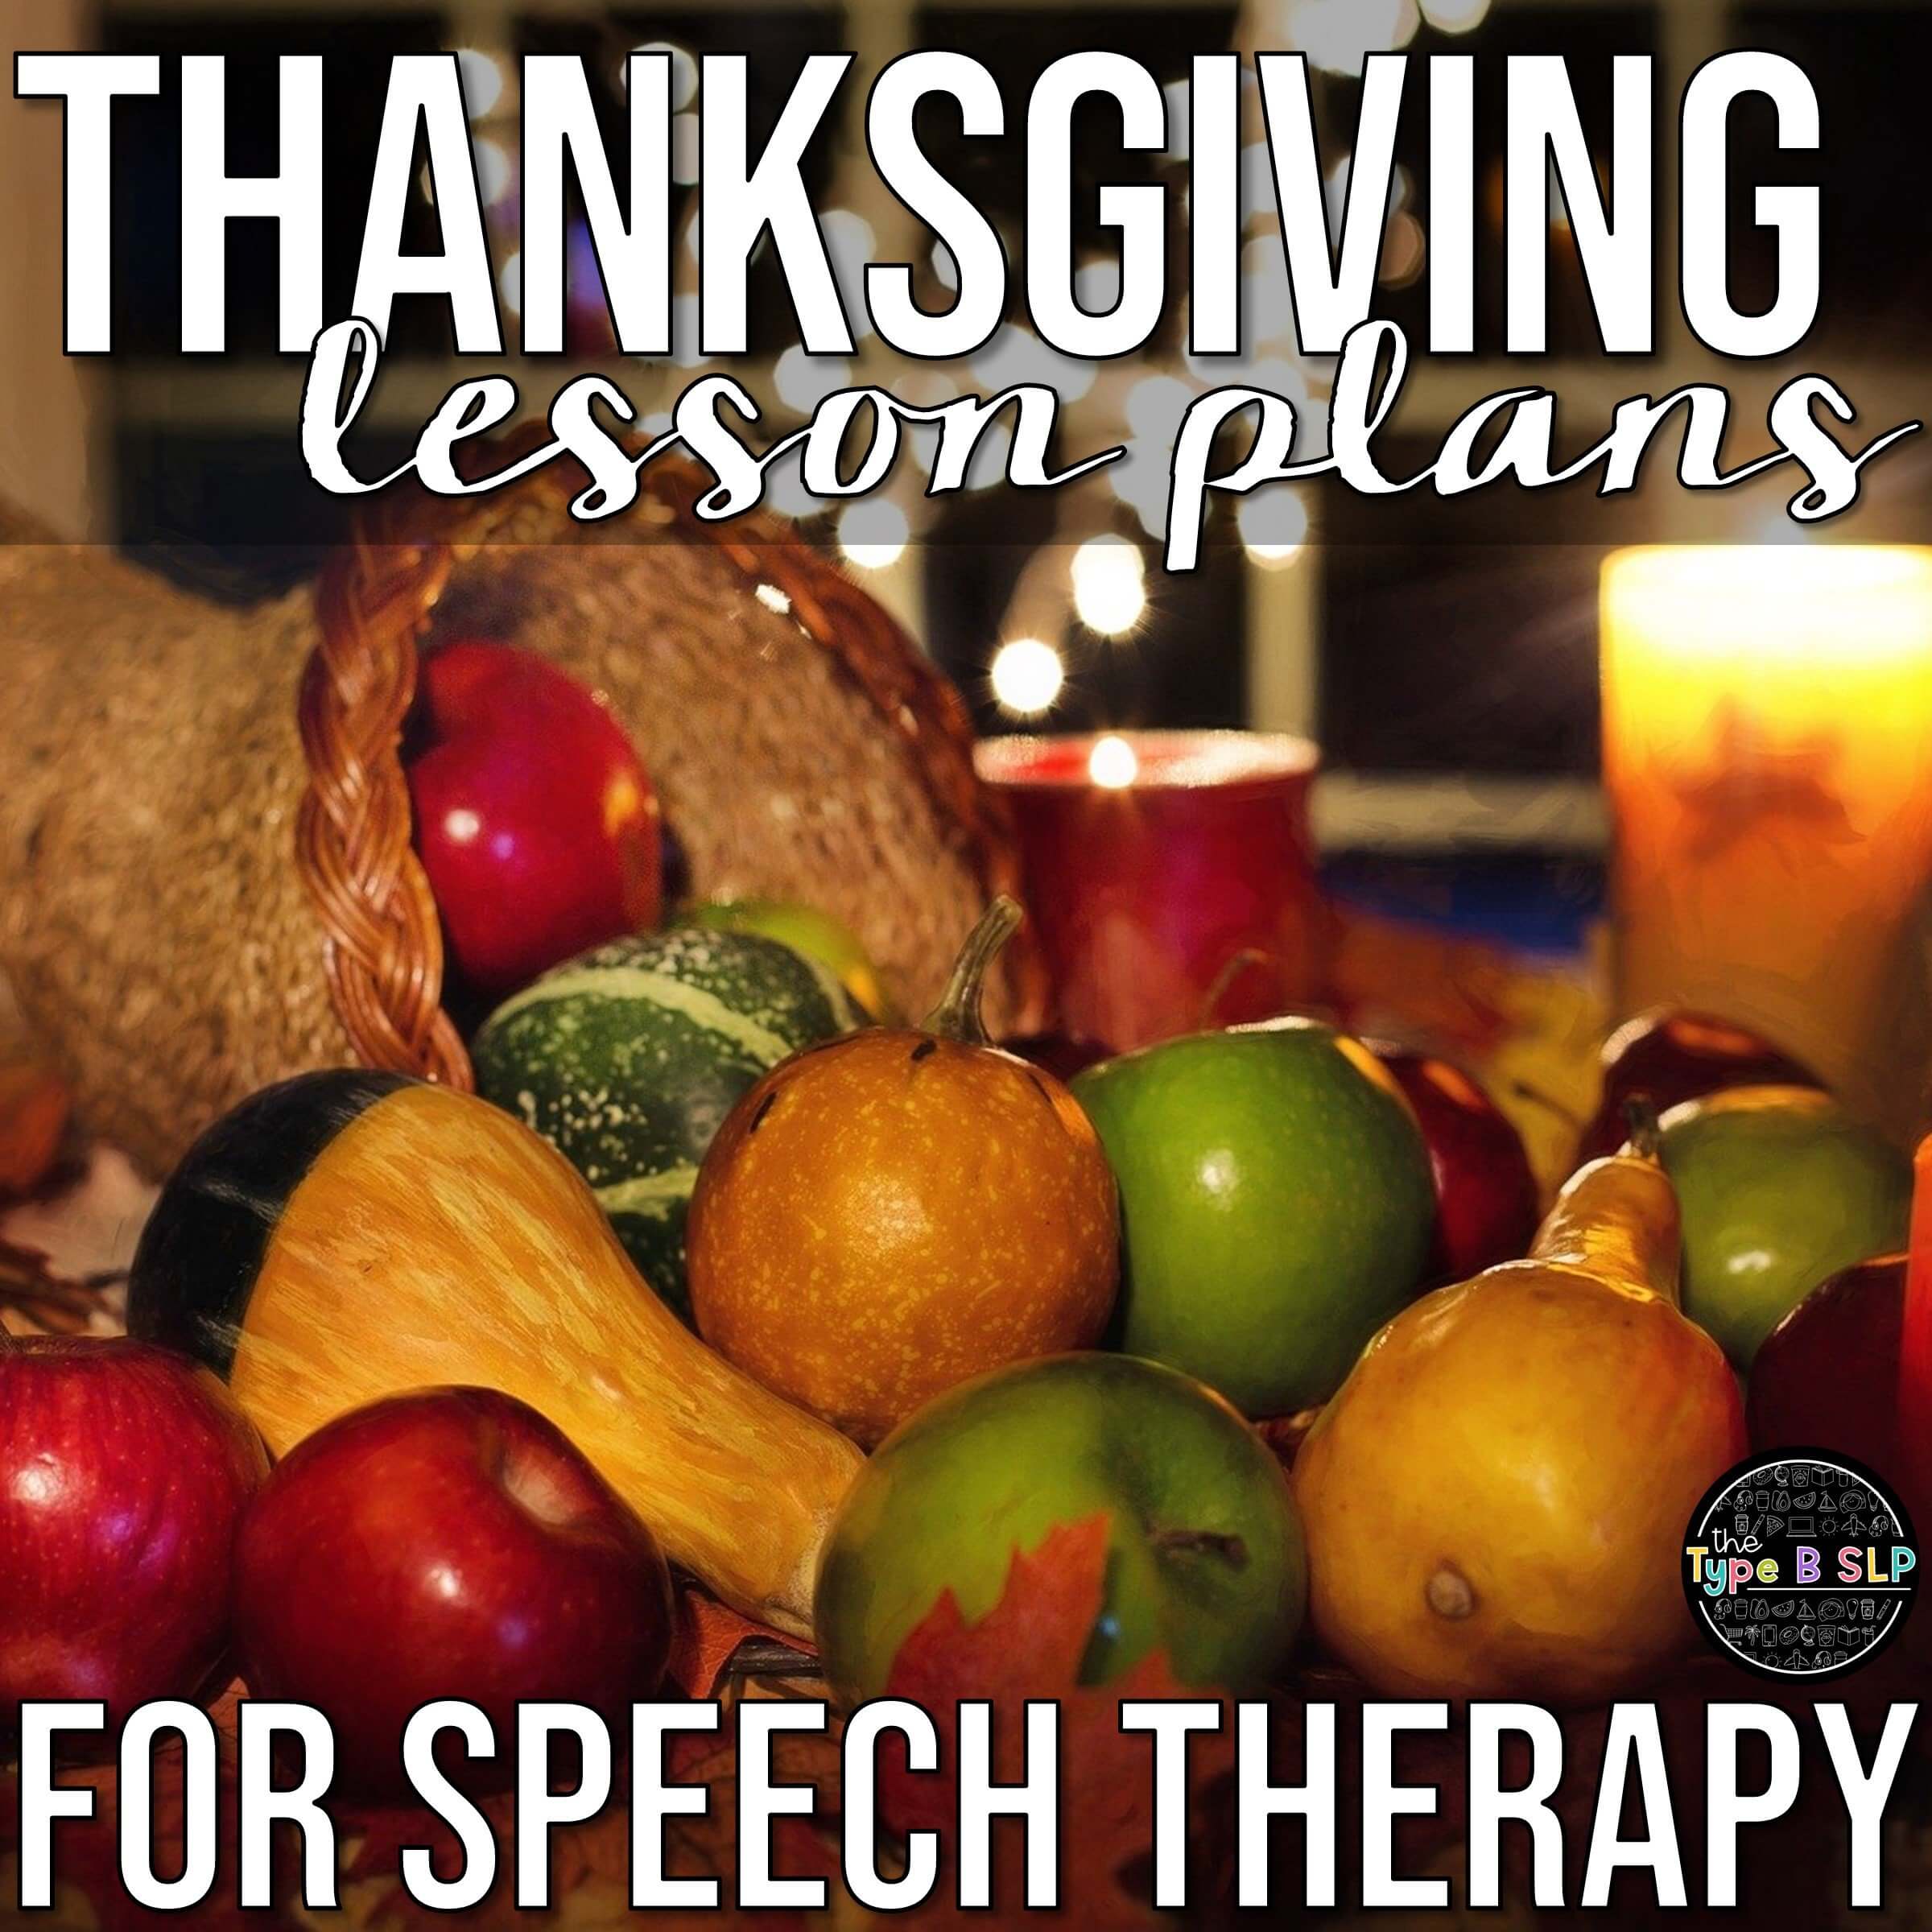 Thanksgiving Themed Lesson Plans for Speech Therapy